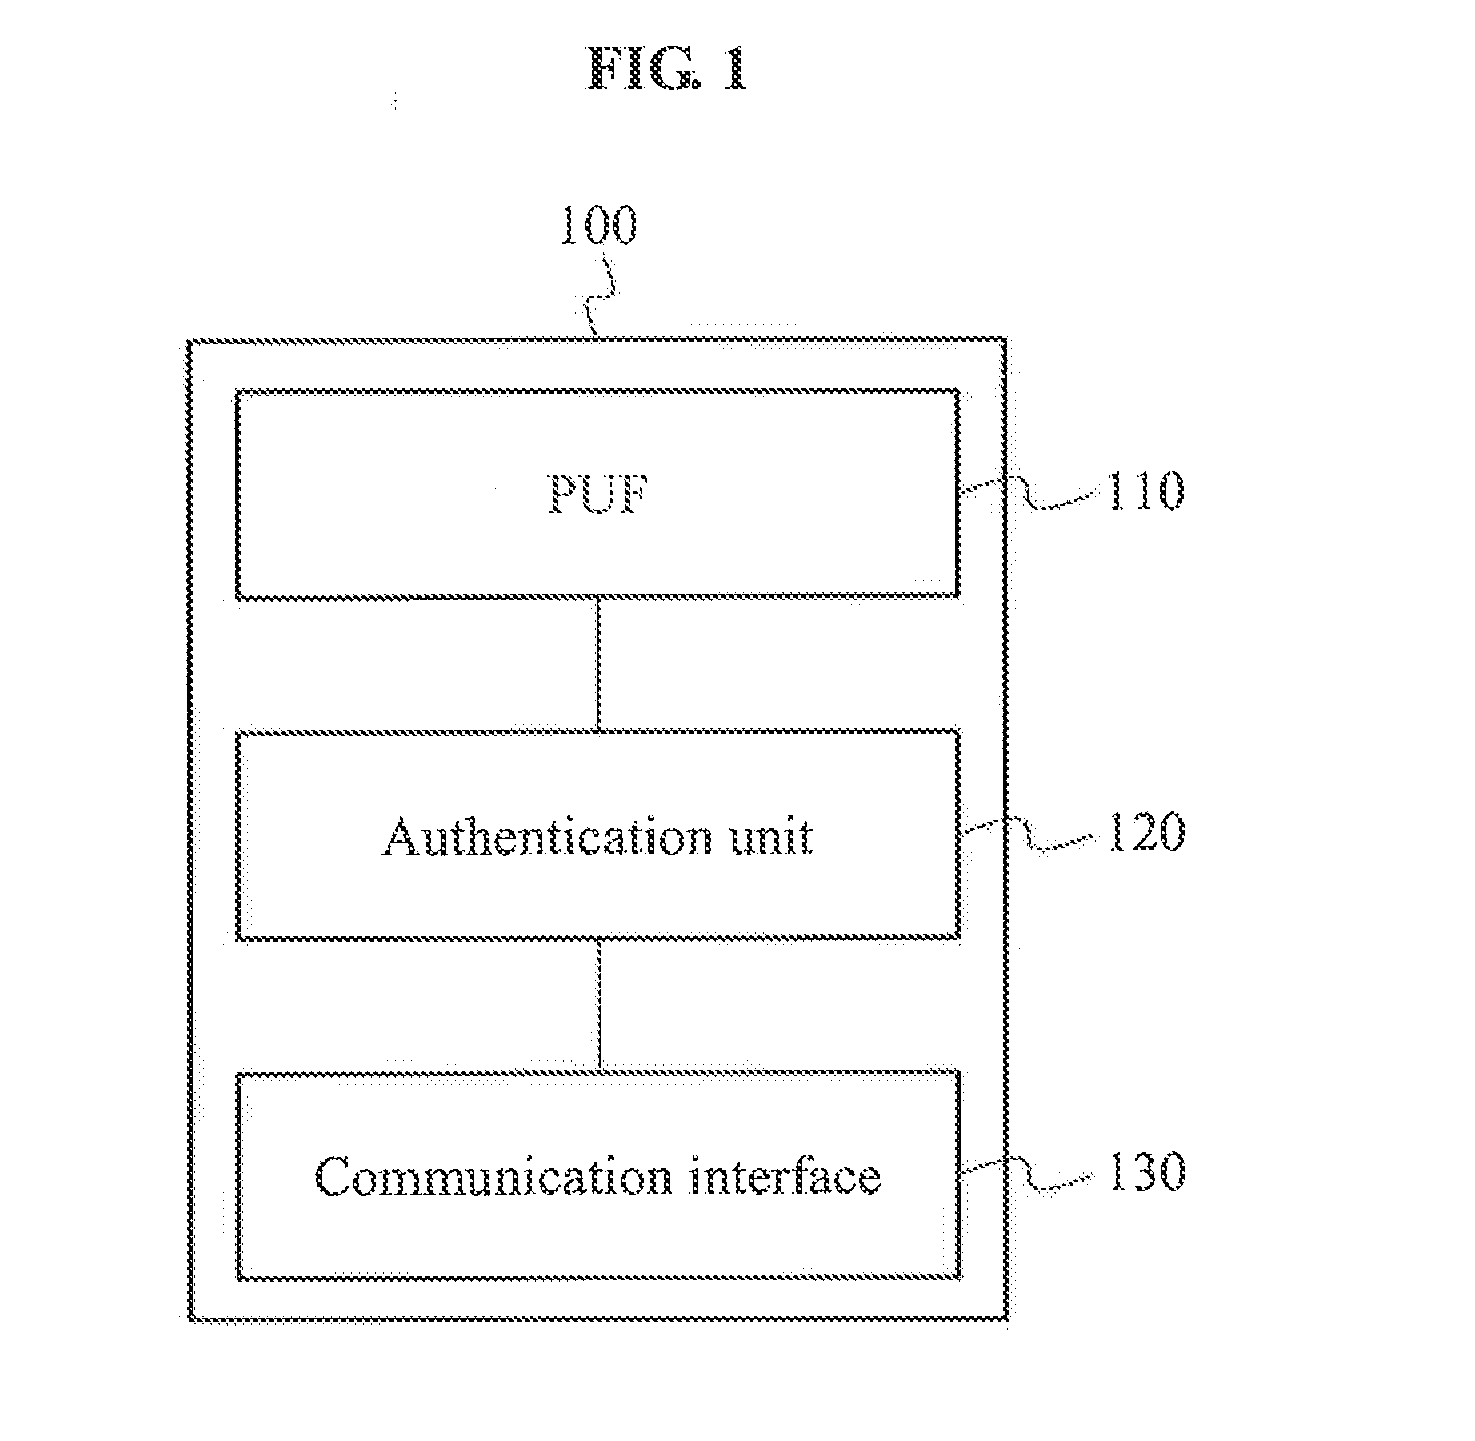 Apparatus and method for authentication between devices based on puf over machine-to-machine communications